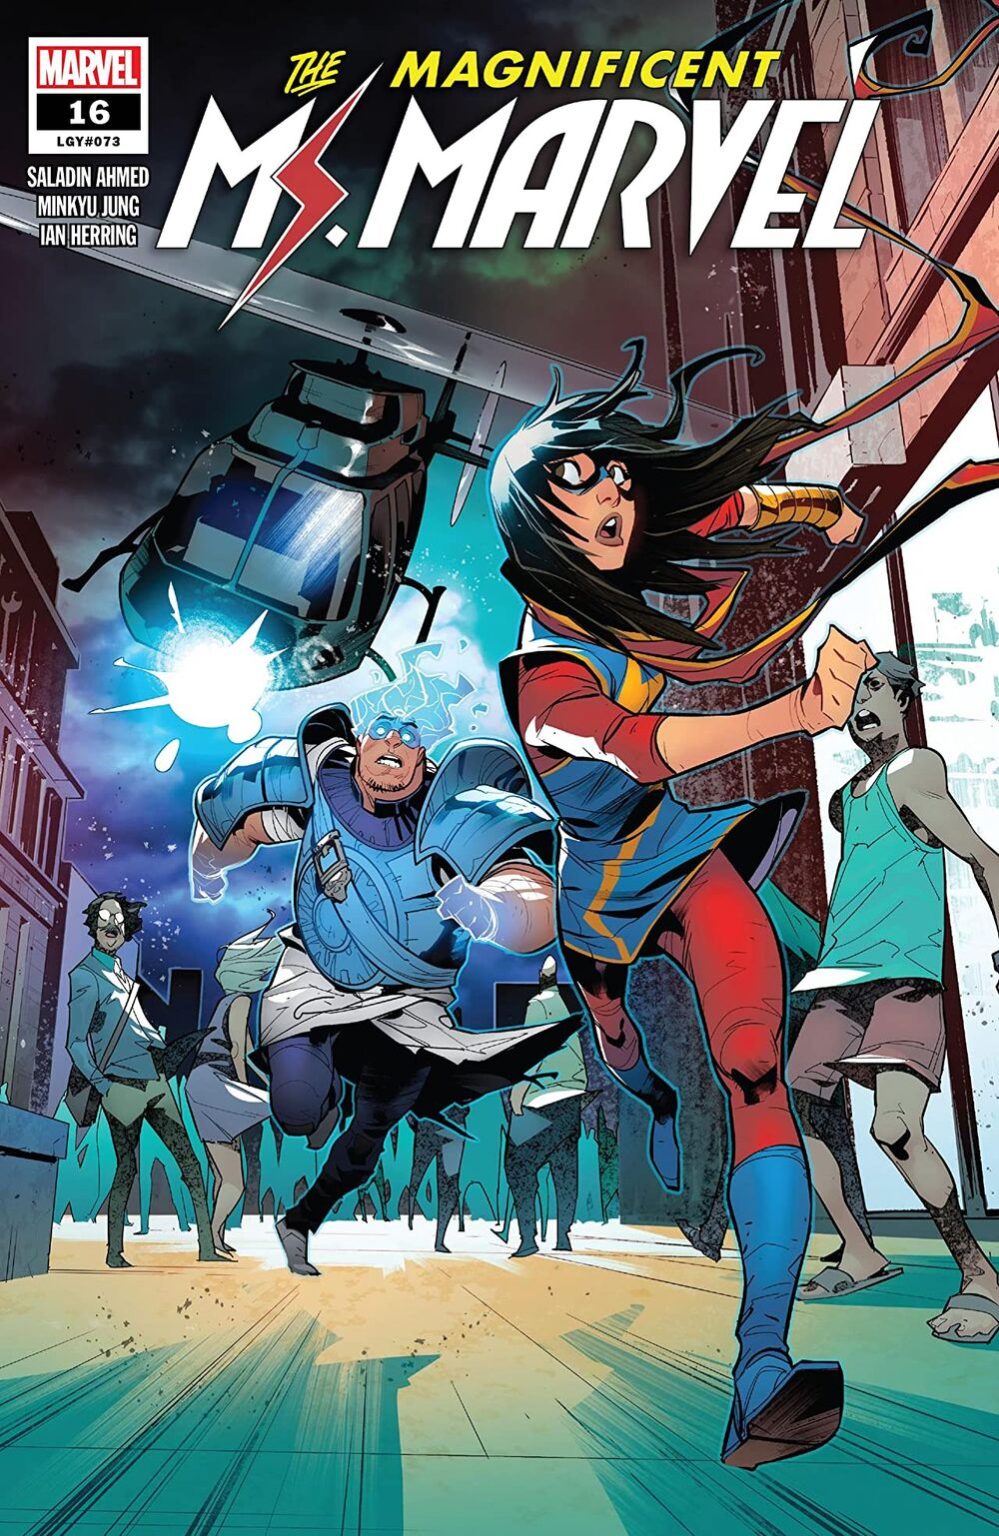 The Magnificent Ms Marvel #16